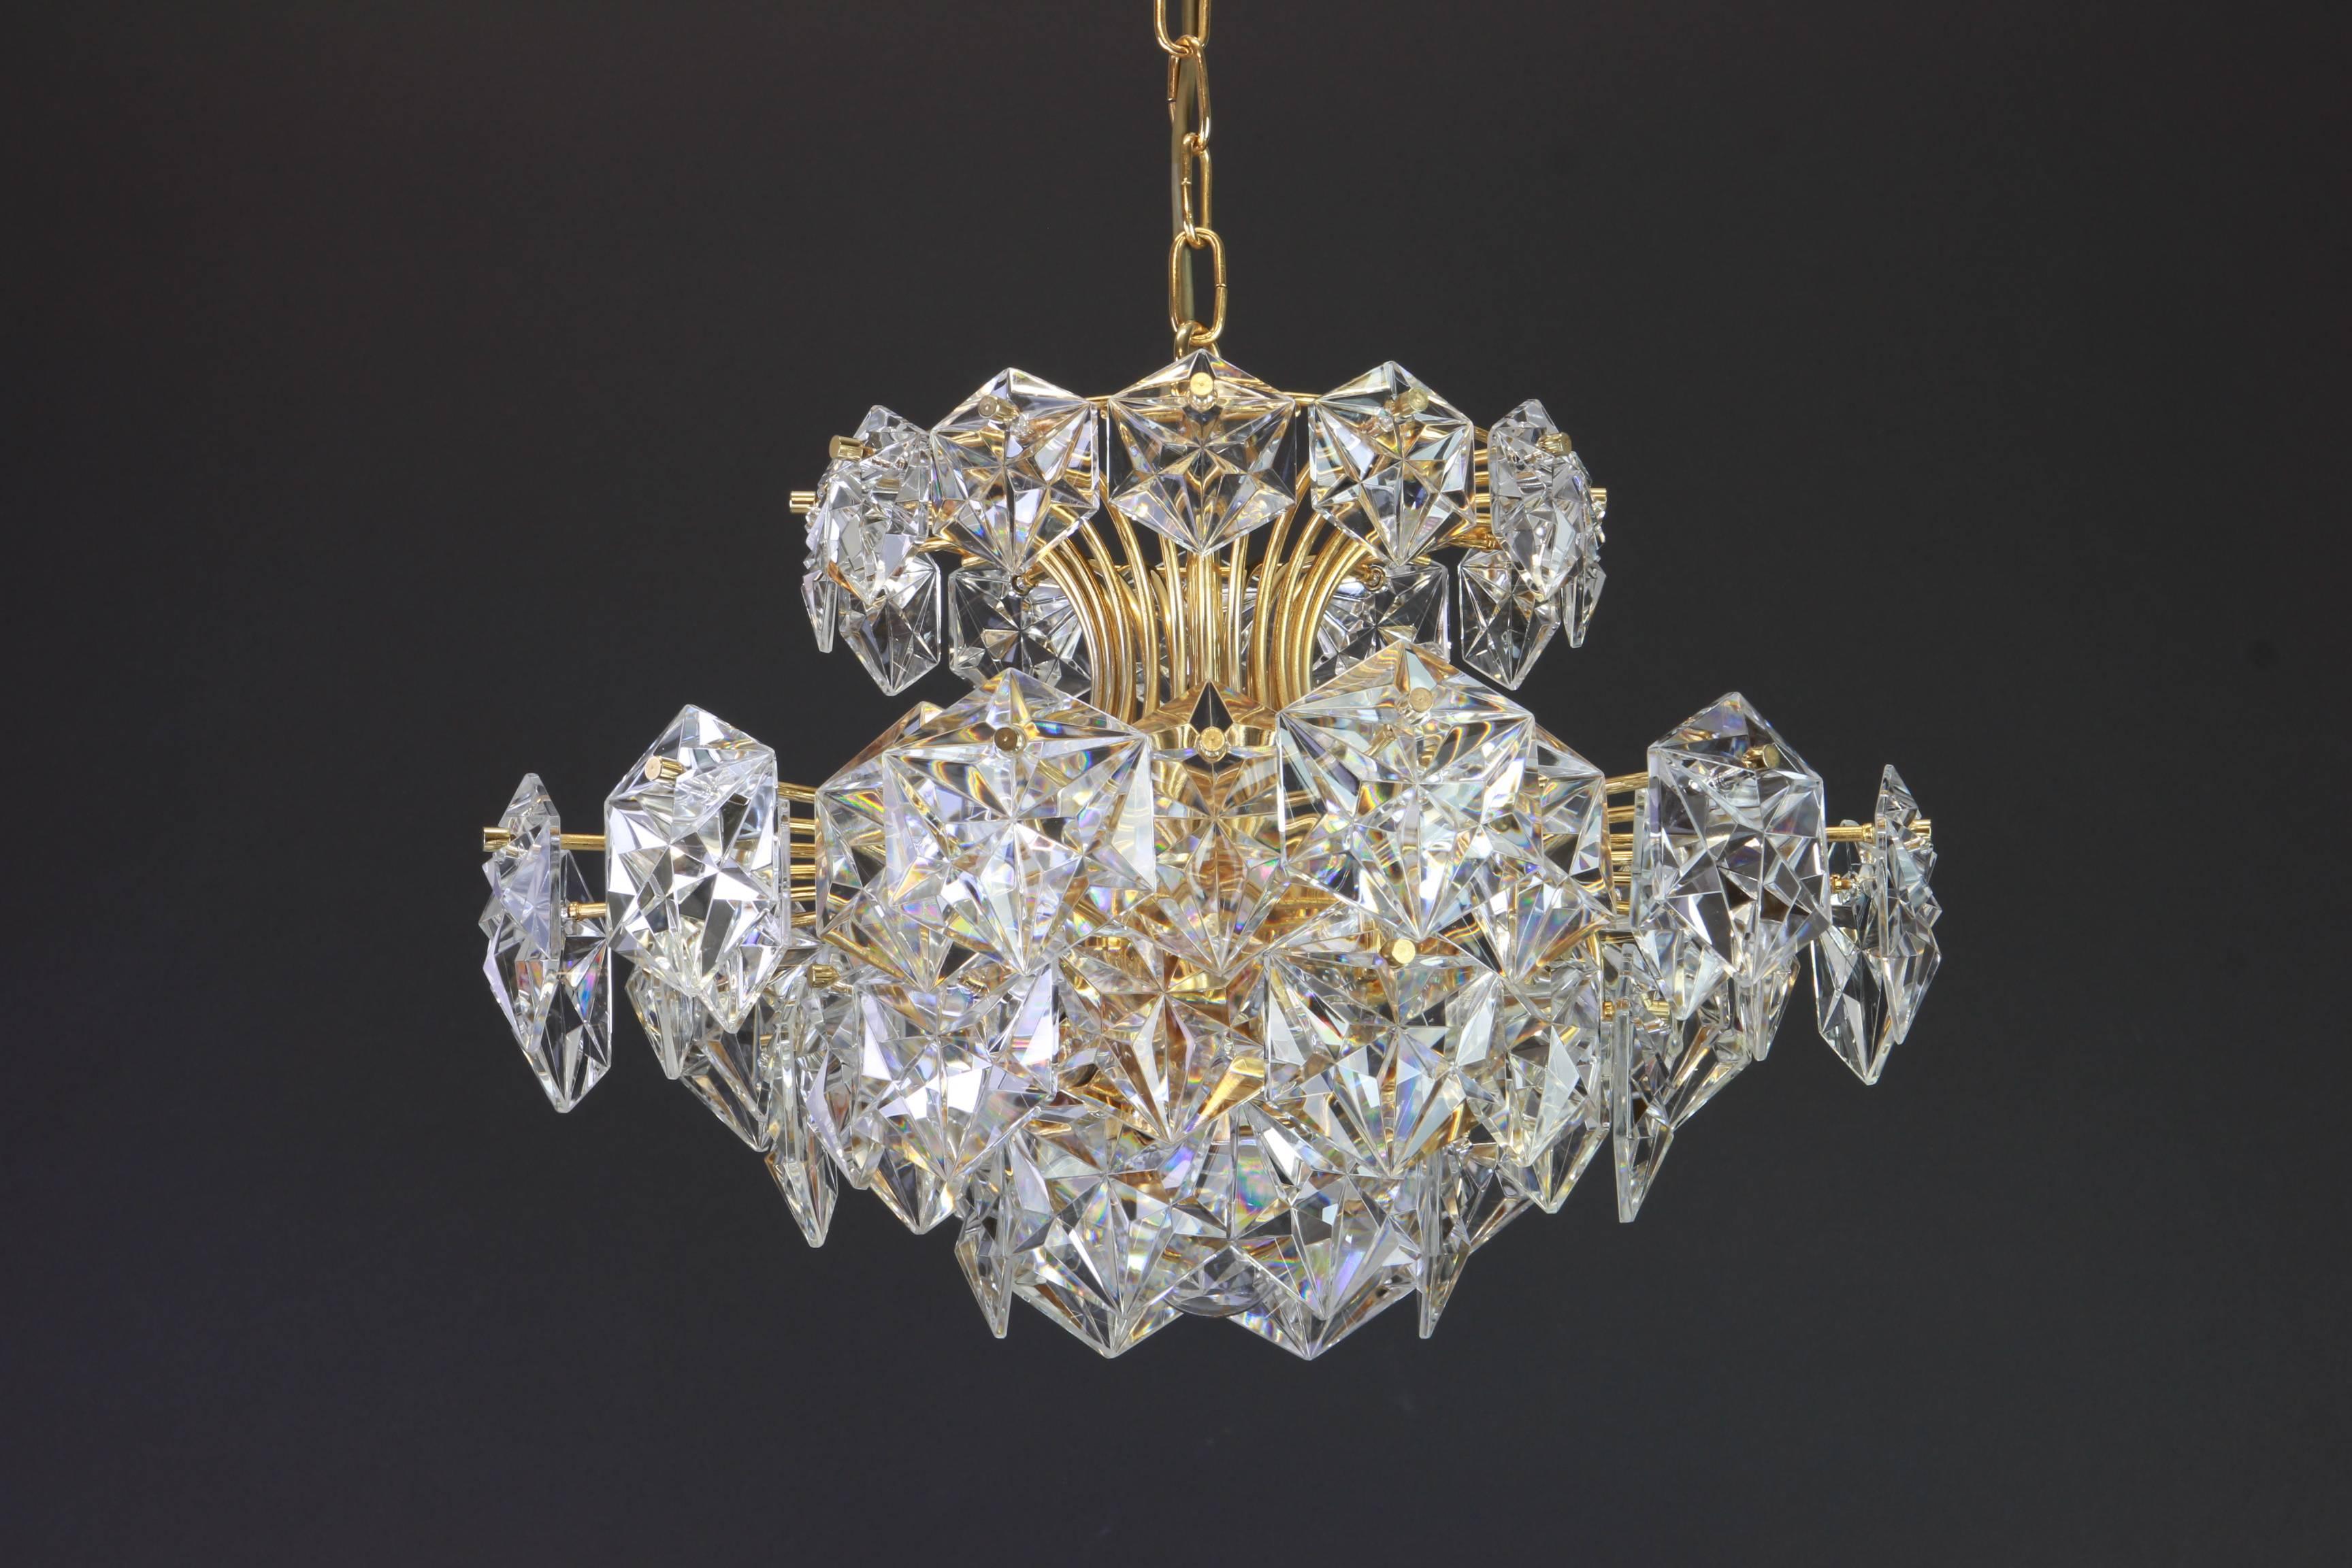 A stunning five-tier chandelier by Kinkeldey, Germany, manufactured in circa 1970-1979. A handmade and high quality piece. The chandelier features a 24-karat gold-plated five-tier structure with lots of facetted crystal glass elements.

High